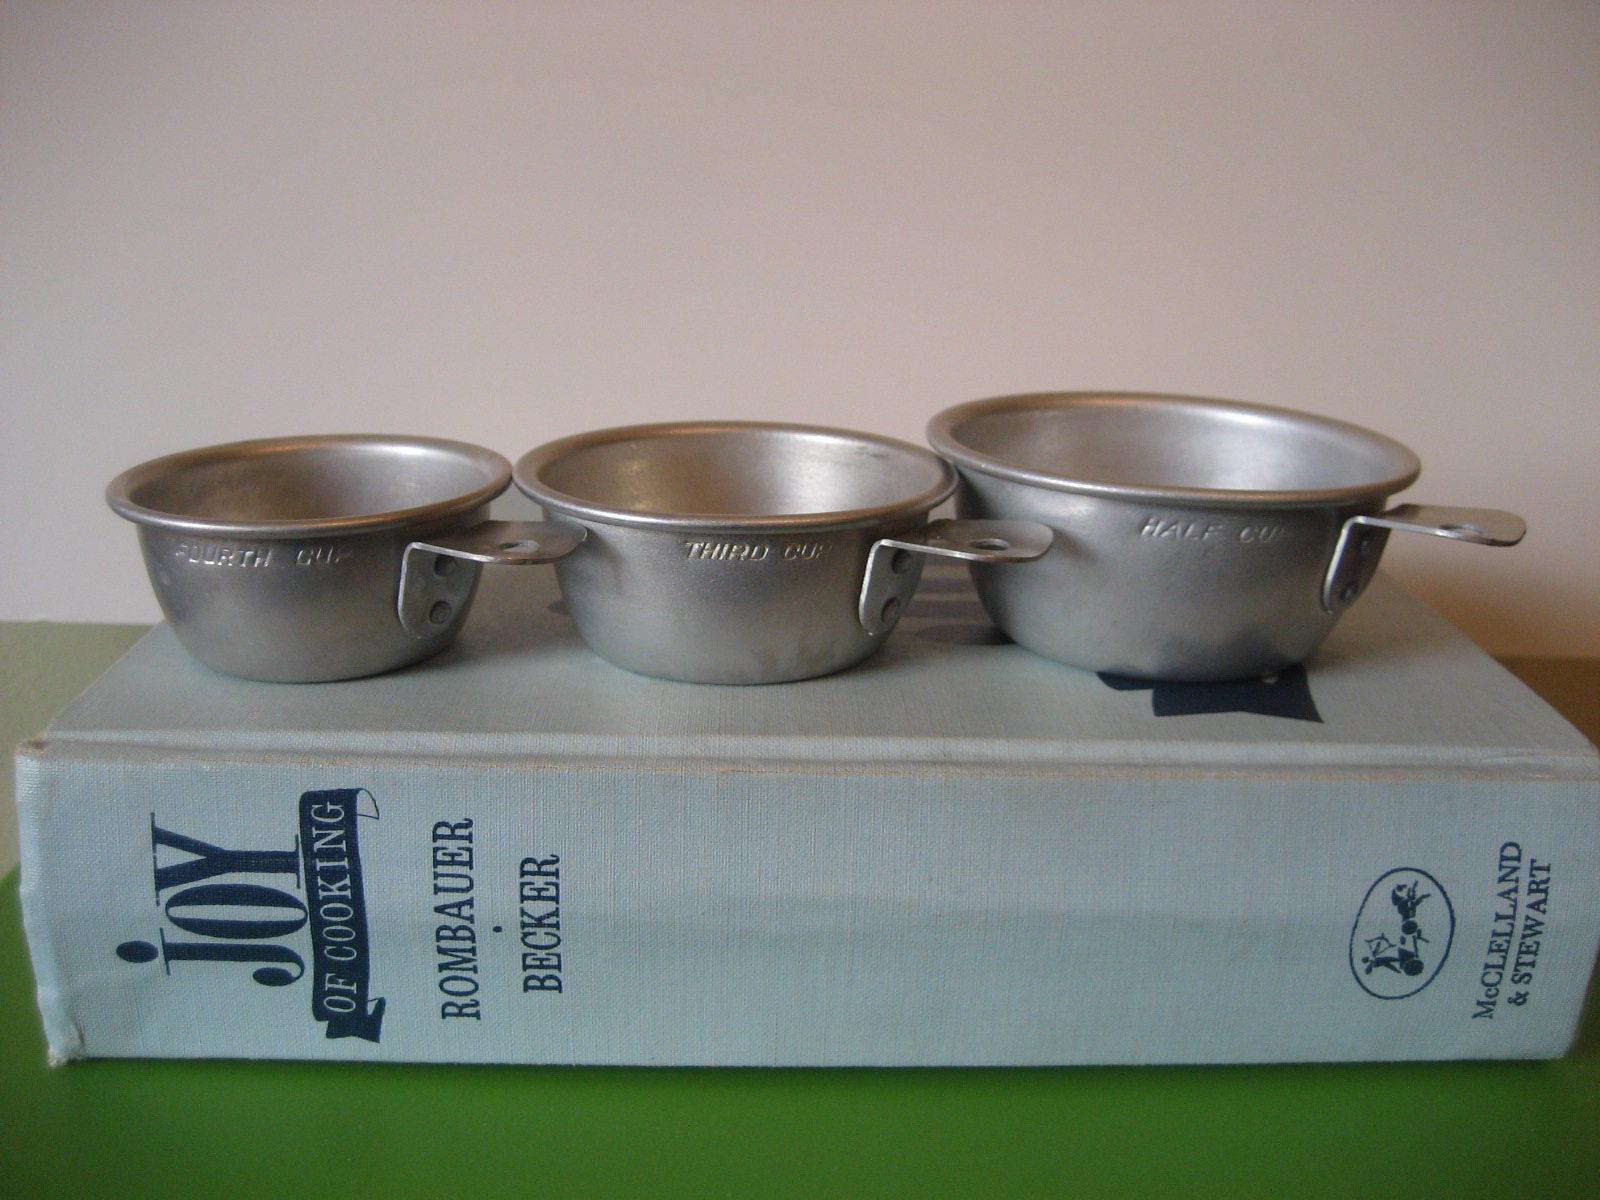 Six Balloons Vintage Delights: Aluminum Measuring Cups